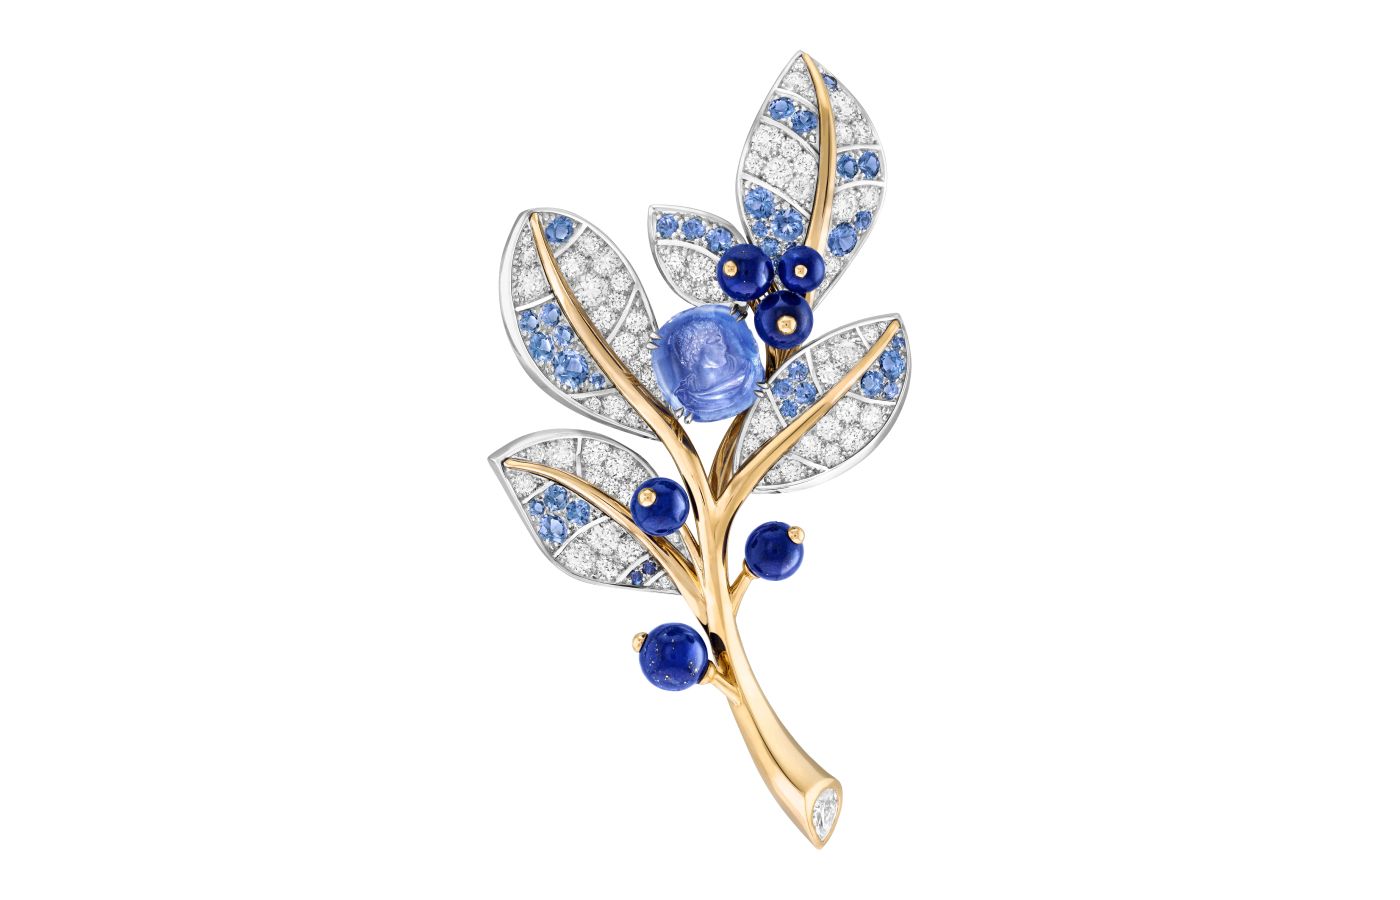 Van Cleep & Arpels Laurier Impérial clip in gold, white gold, a 4.90-ct carved cushion-cut sapphire, sapphires, lapis lazuli and diamonds from Le Grand Tour High Jewellery collection